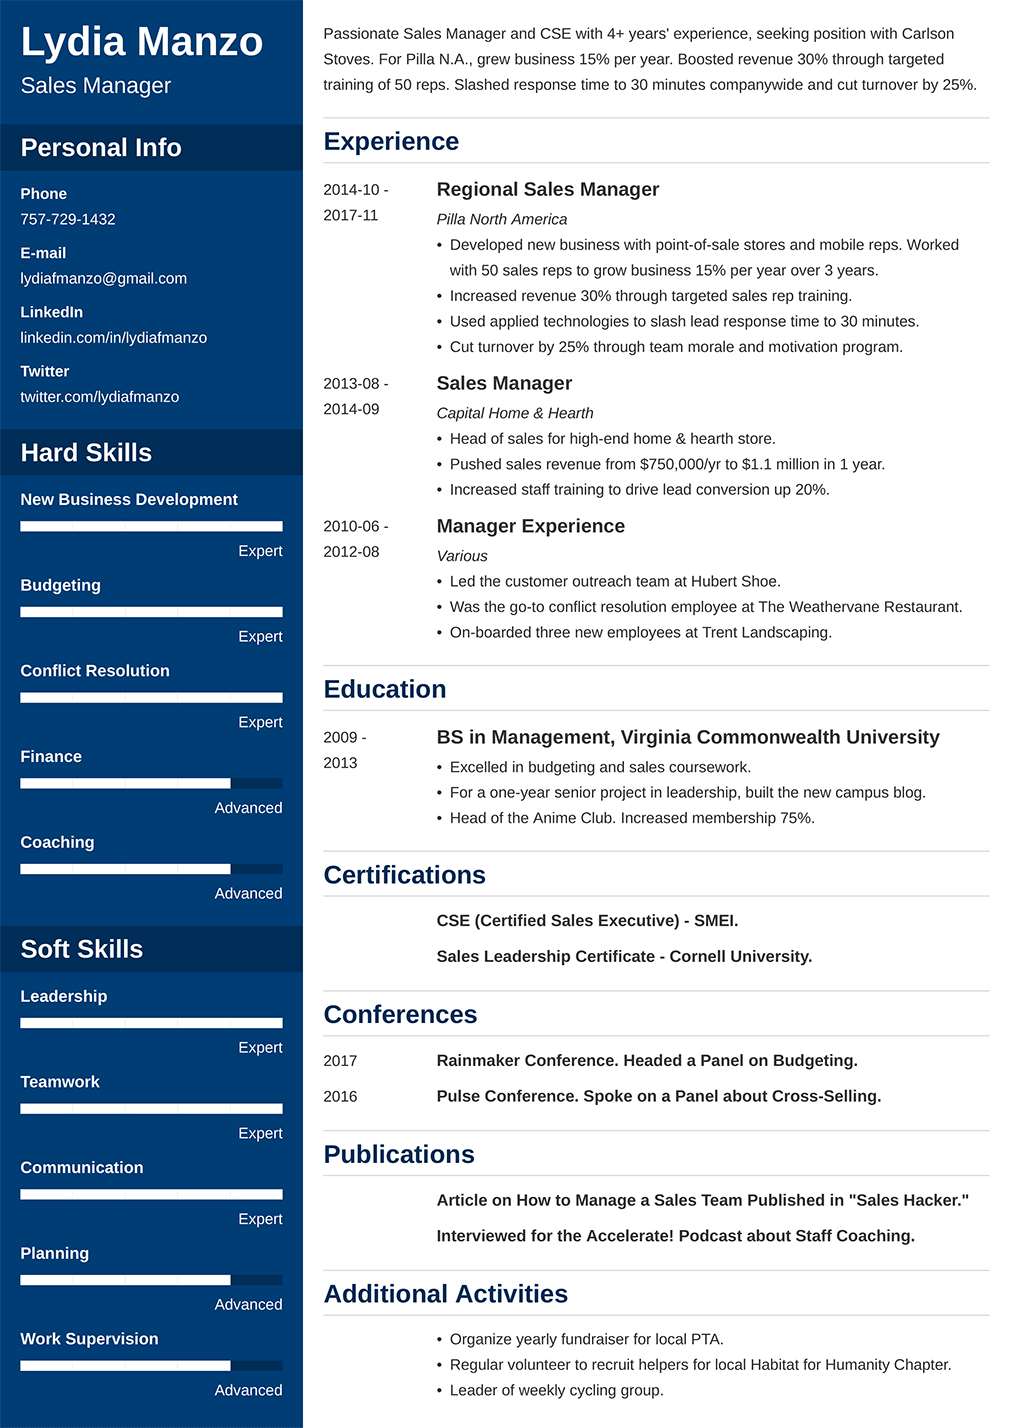 500+ Resume Examples & Writing Guides for Any Job in 2023